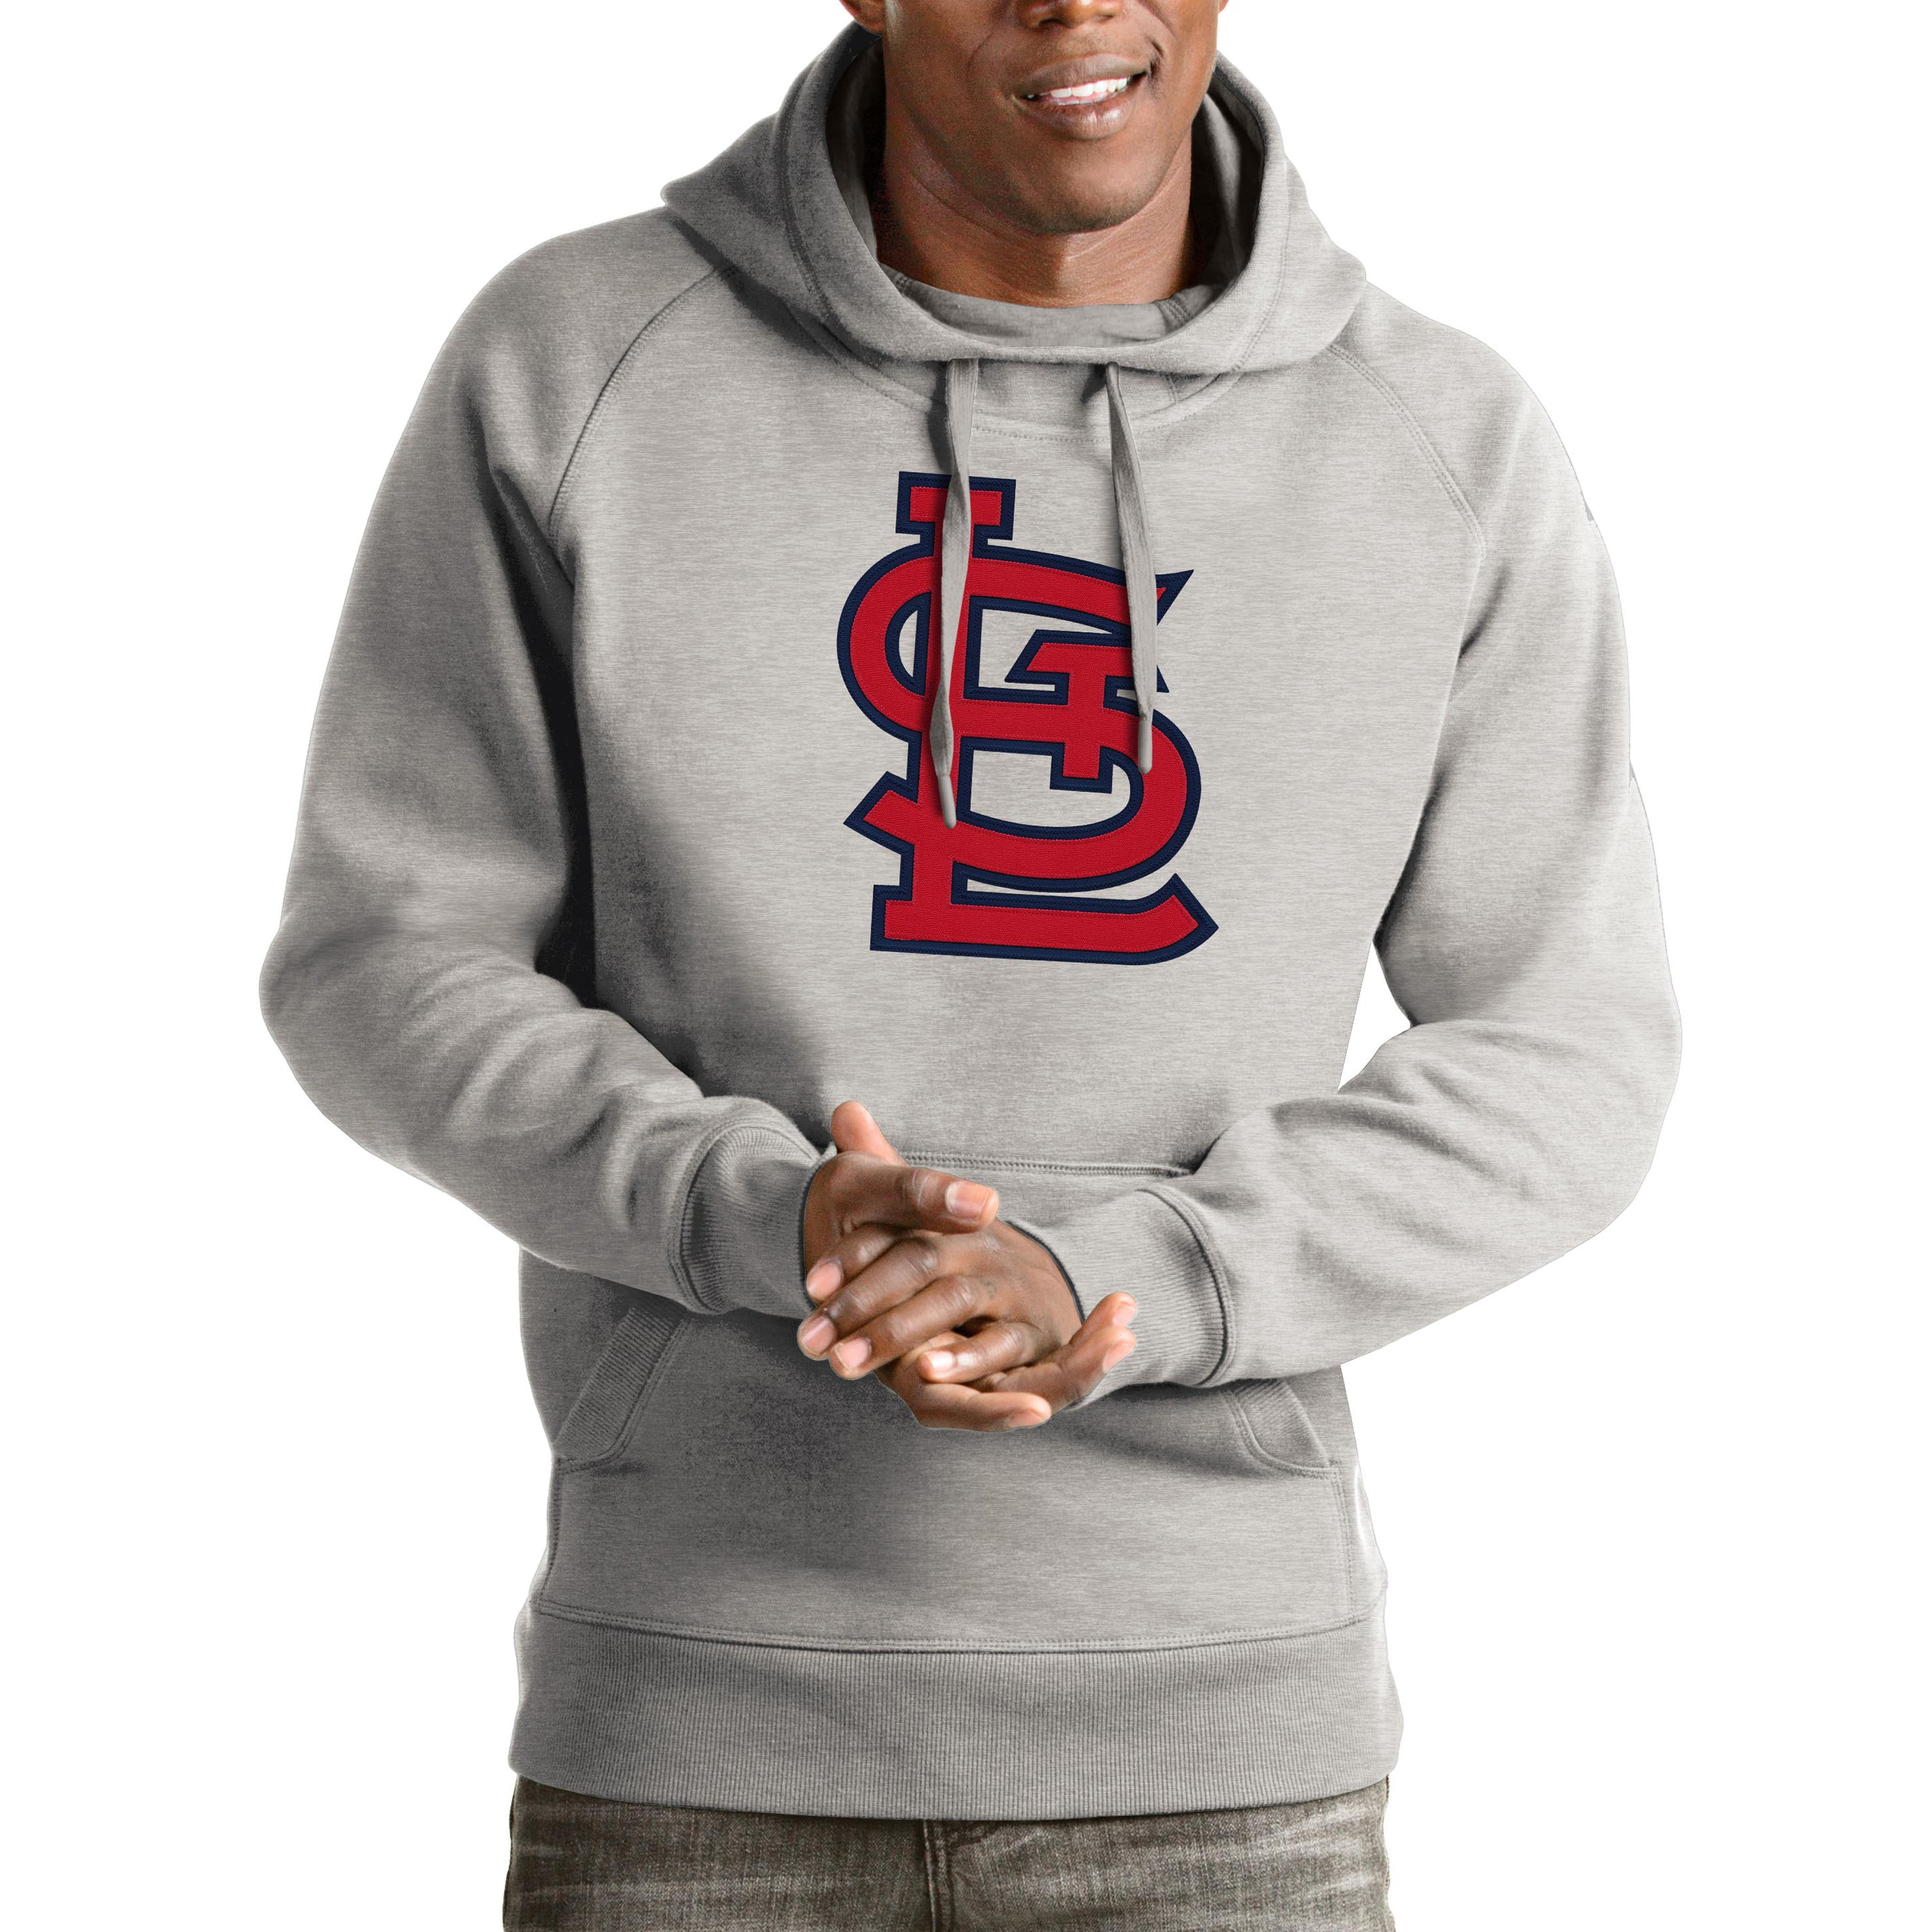 Men's Antigua Heathered Gray St. Louis Cardinals Victory Pullover